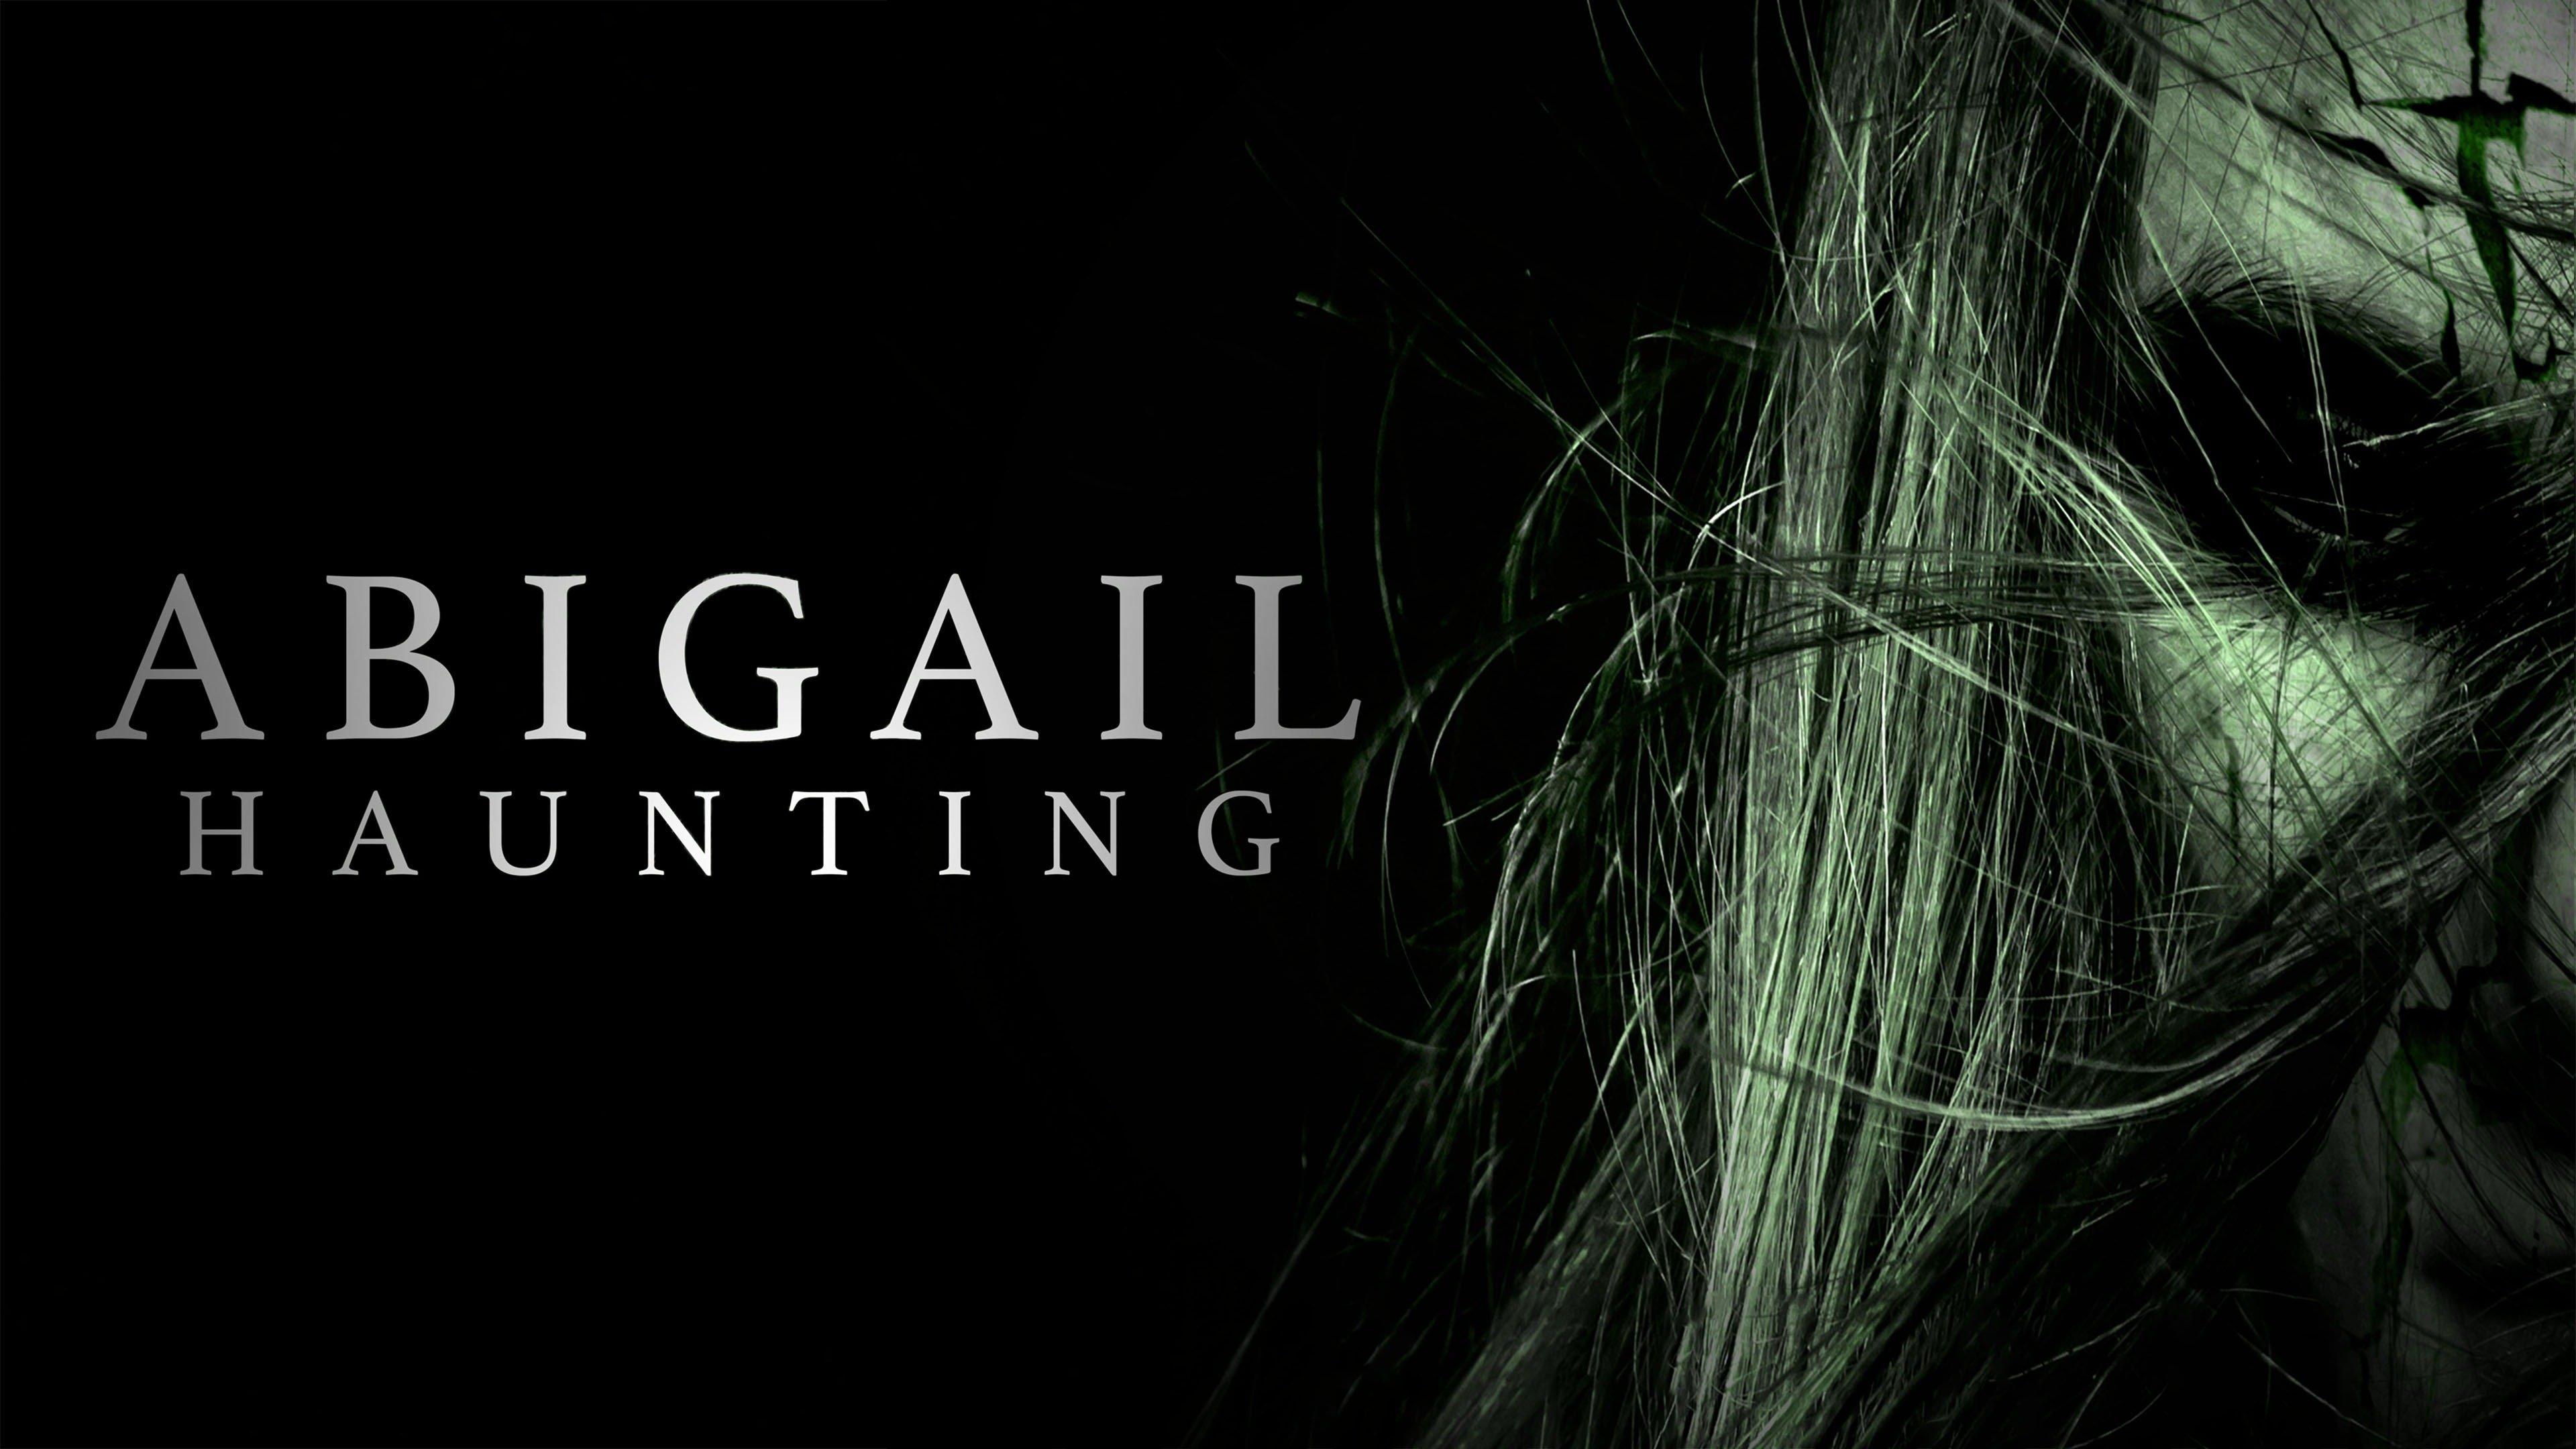 Watch Abigail Haunting Streaming Online on Philo (Free Trial)